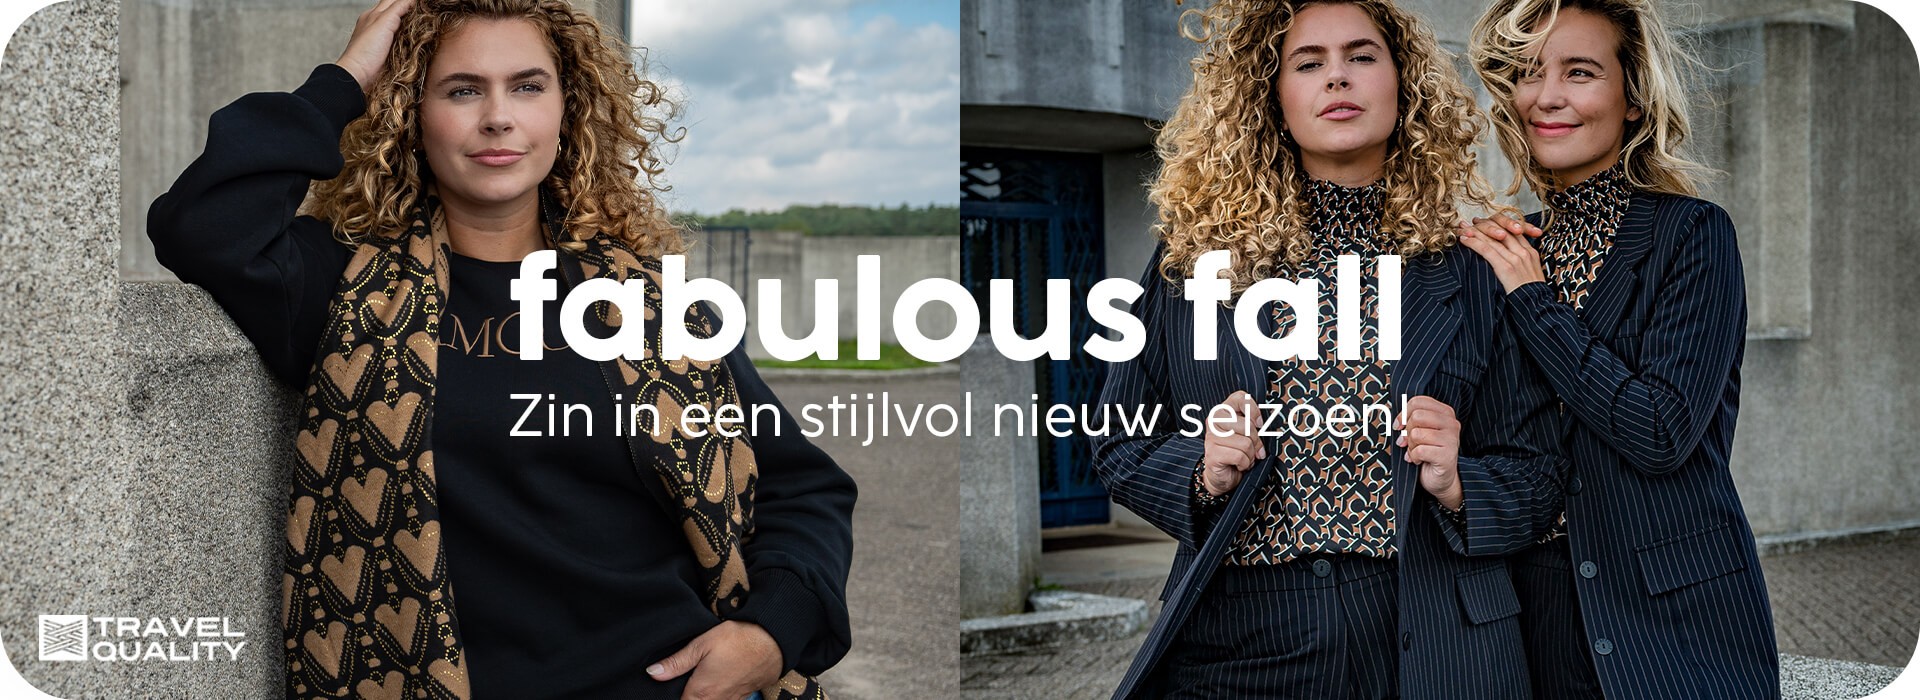 Collectie Fabulous Fall